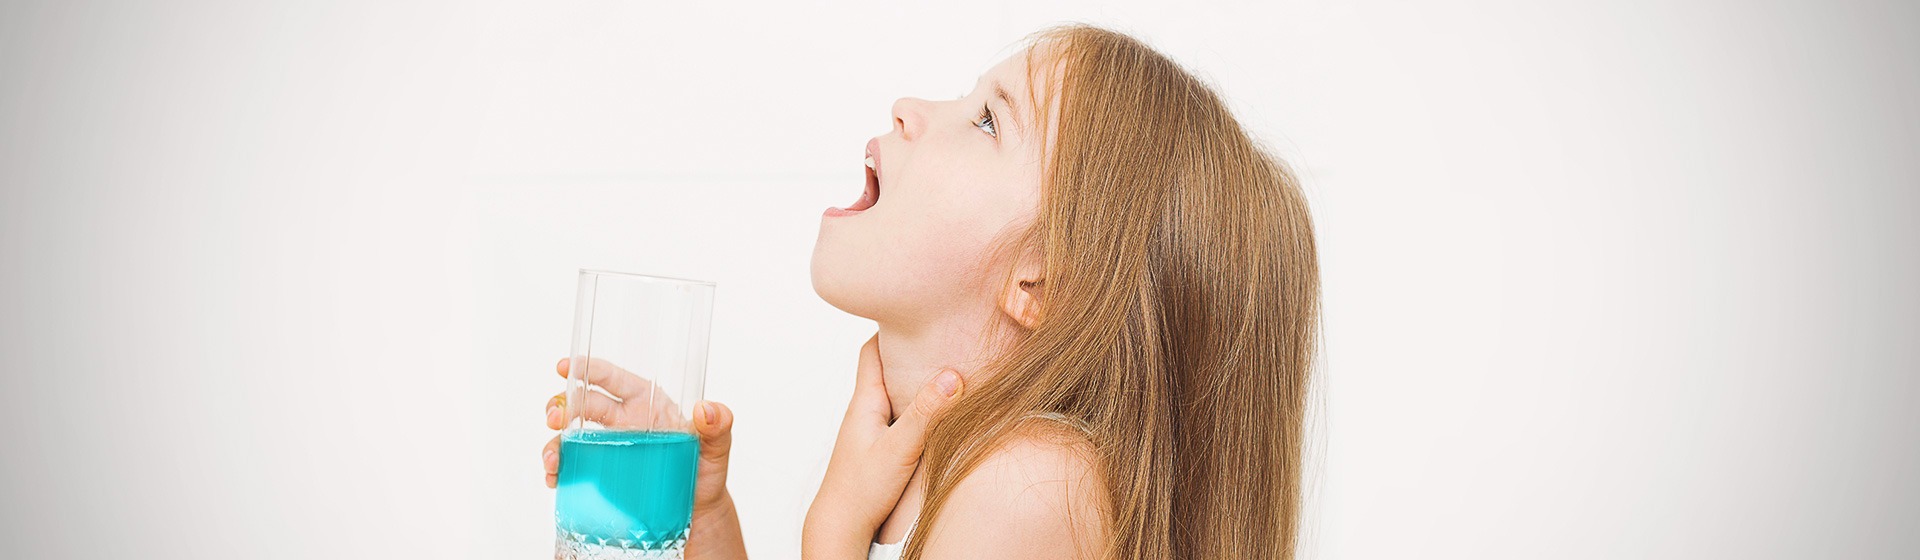 What to Do if Your Child Swallowed Mouthwash?